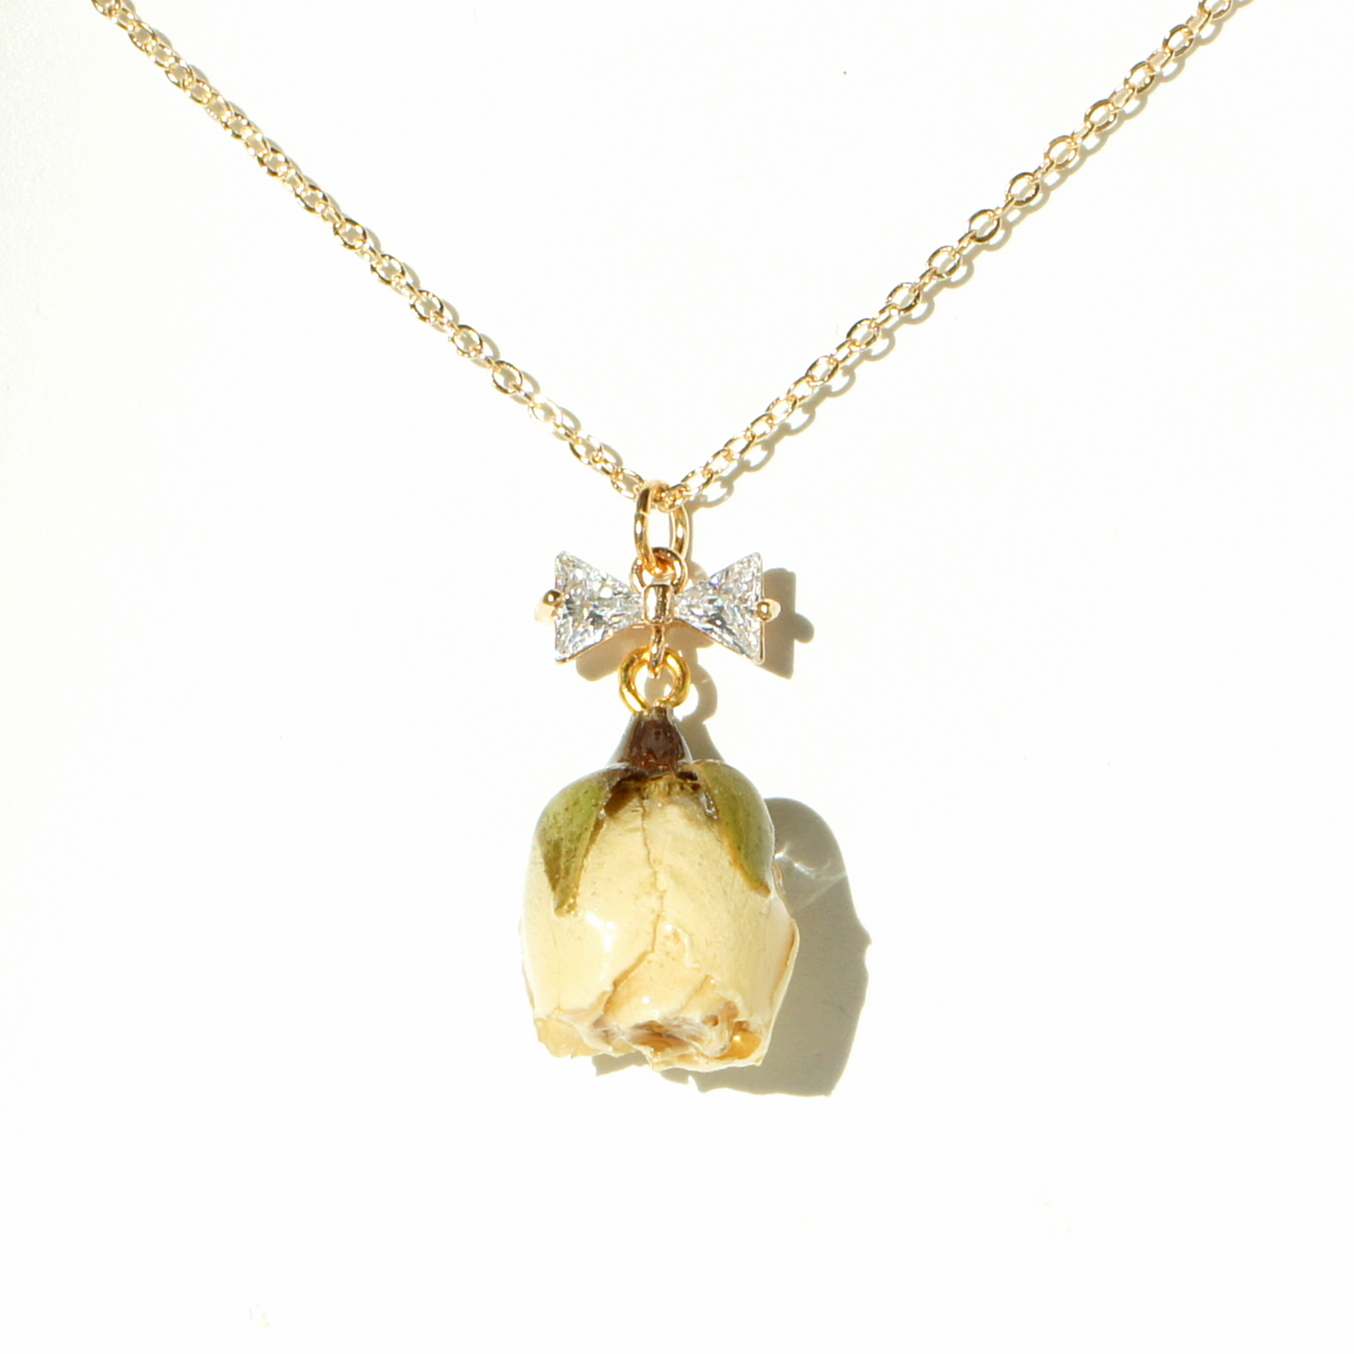 *REAL FLOWER* Rosa Brillante Rosebud Pendant Chain Necklace with Crystal Bow